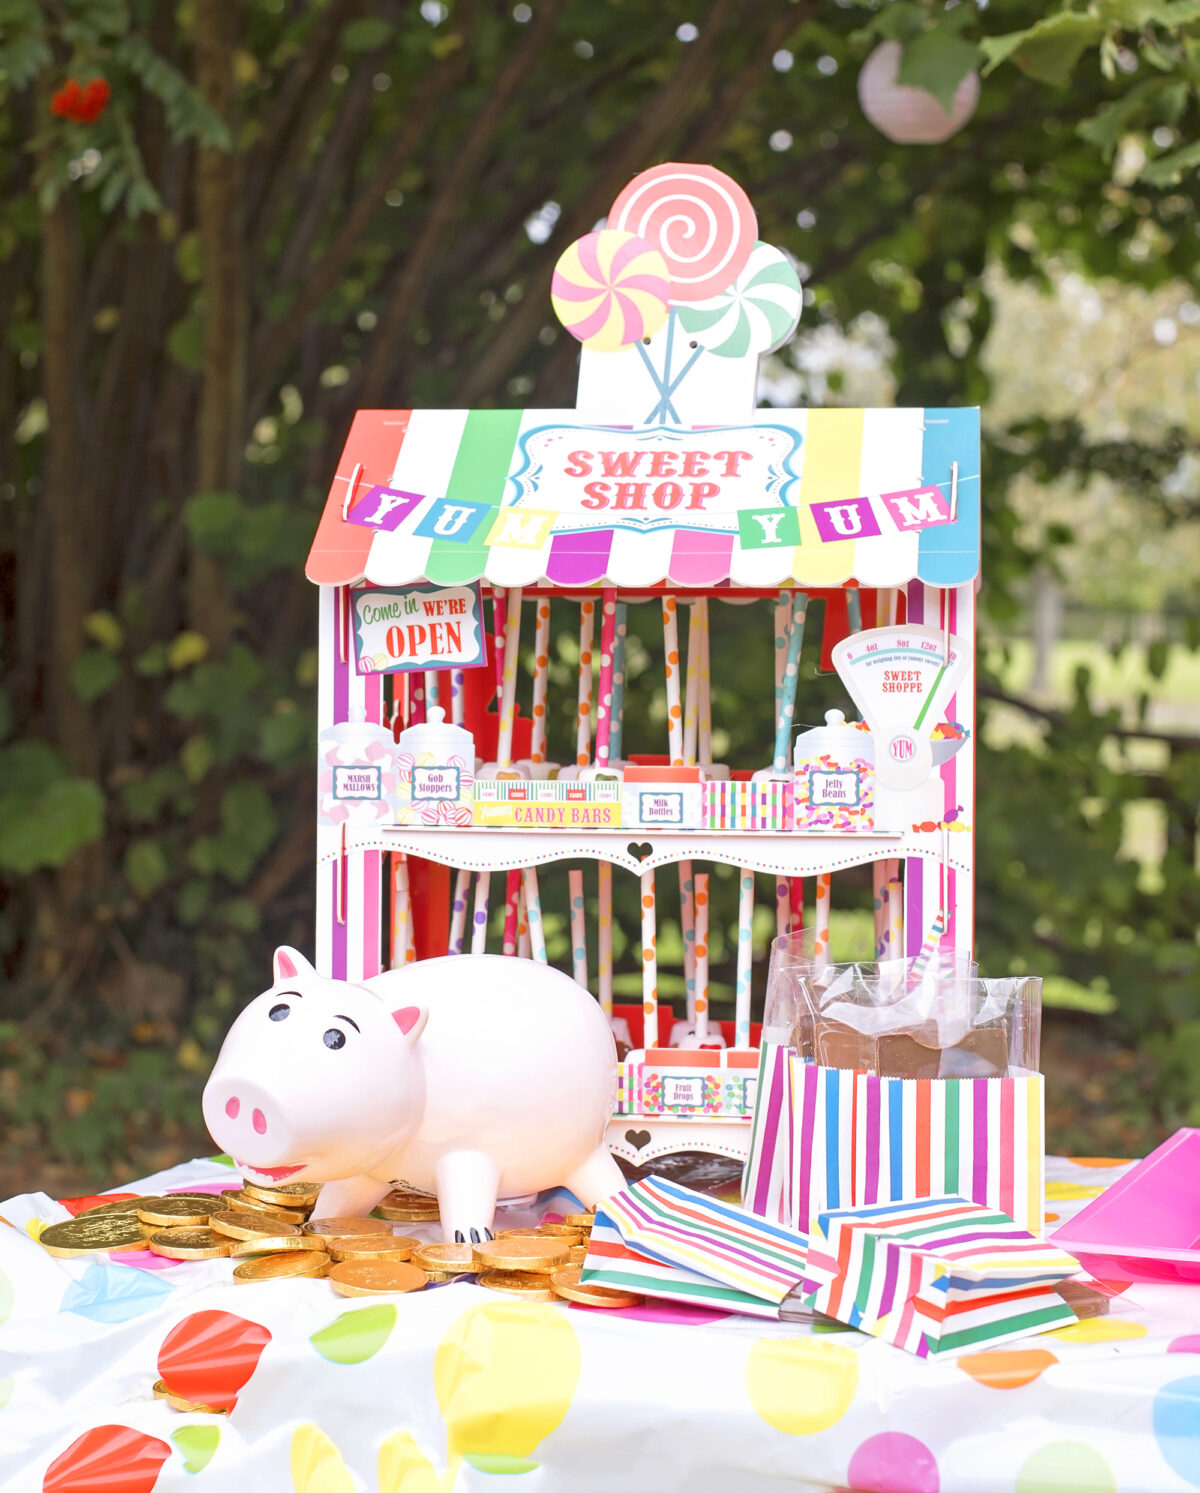 Image shows a ceramic piggy bank in the shame of Hamm from Disney's Toy Story sat on top of a mountain of gold chocolate coins. In the background is a novelty sweet stand filled with chocolate dipped marshmallow pops and in the foreground are chocolate carnival tickets.